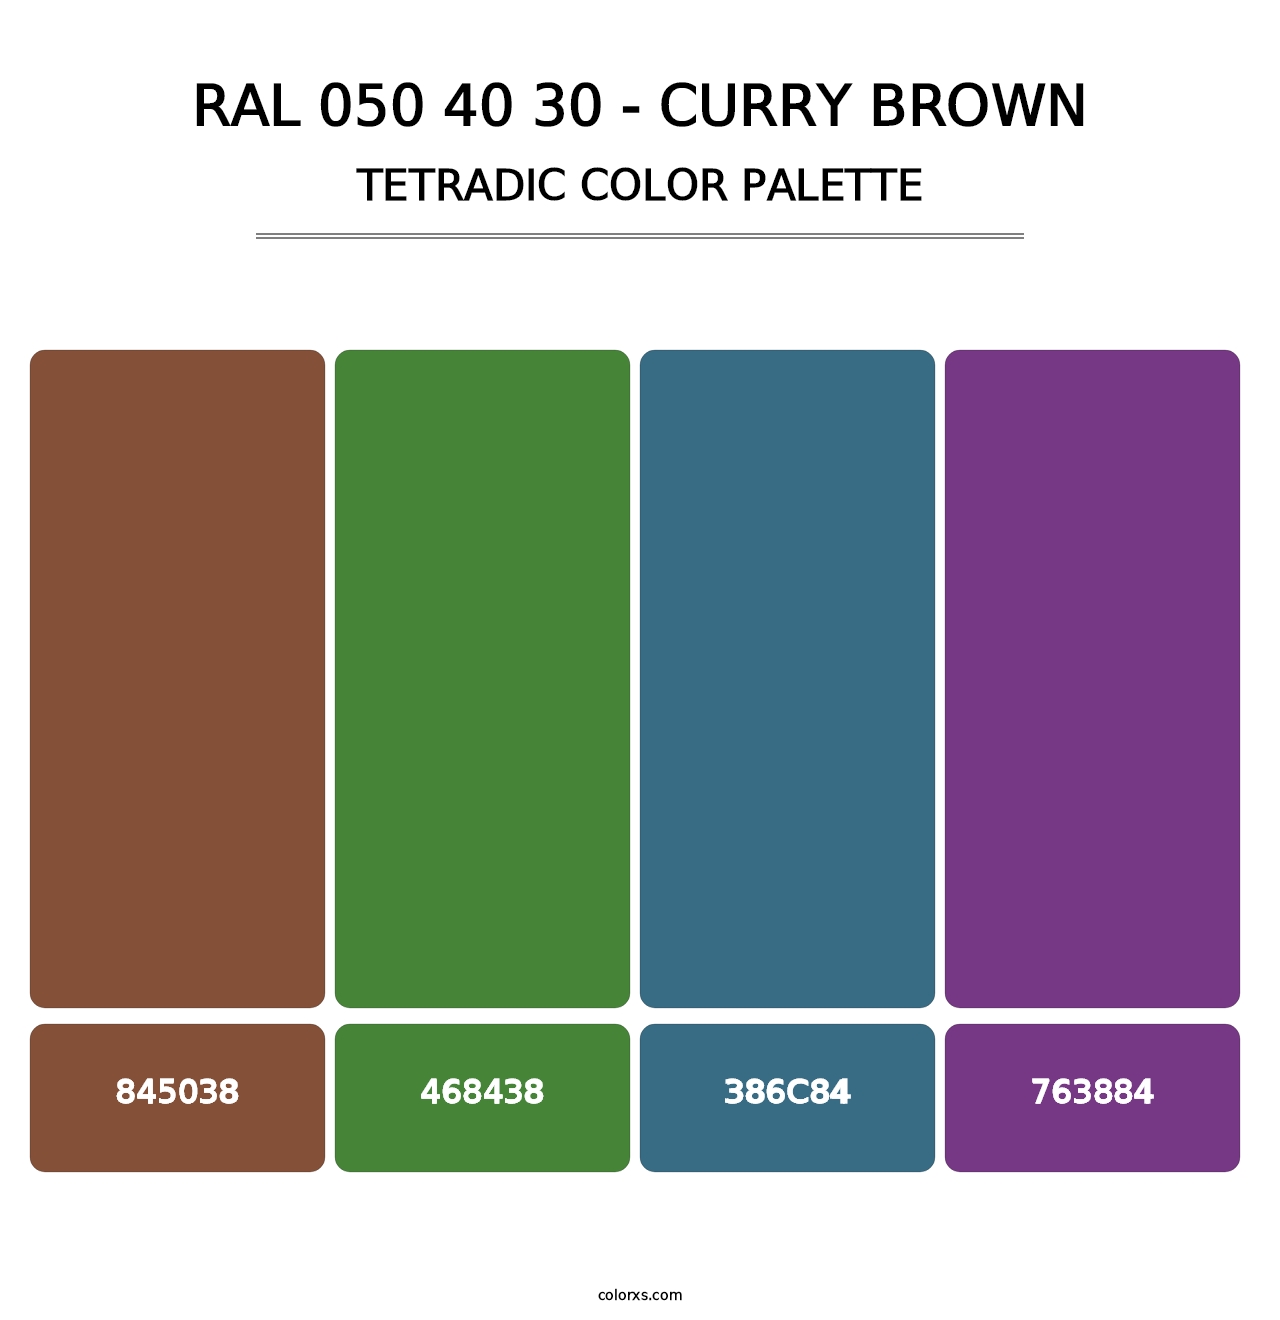 RAL 050 40 30 - Curry Brown - Tetradic Color Palette